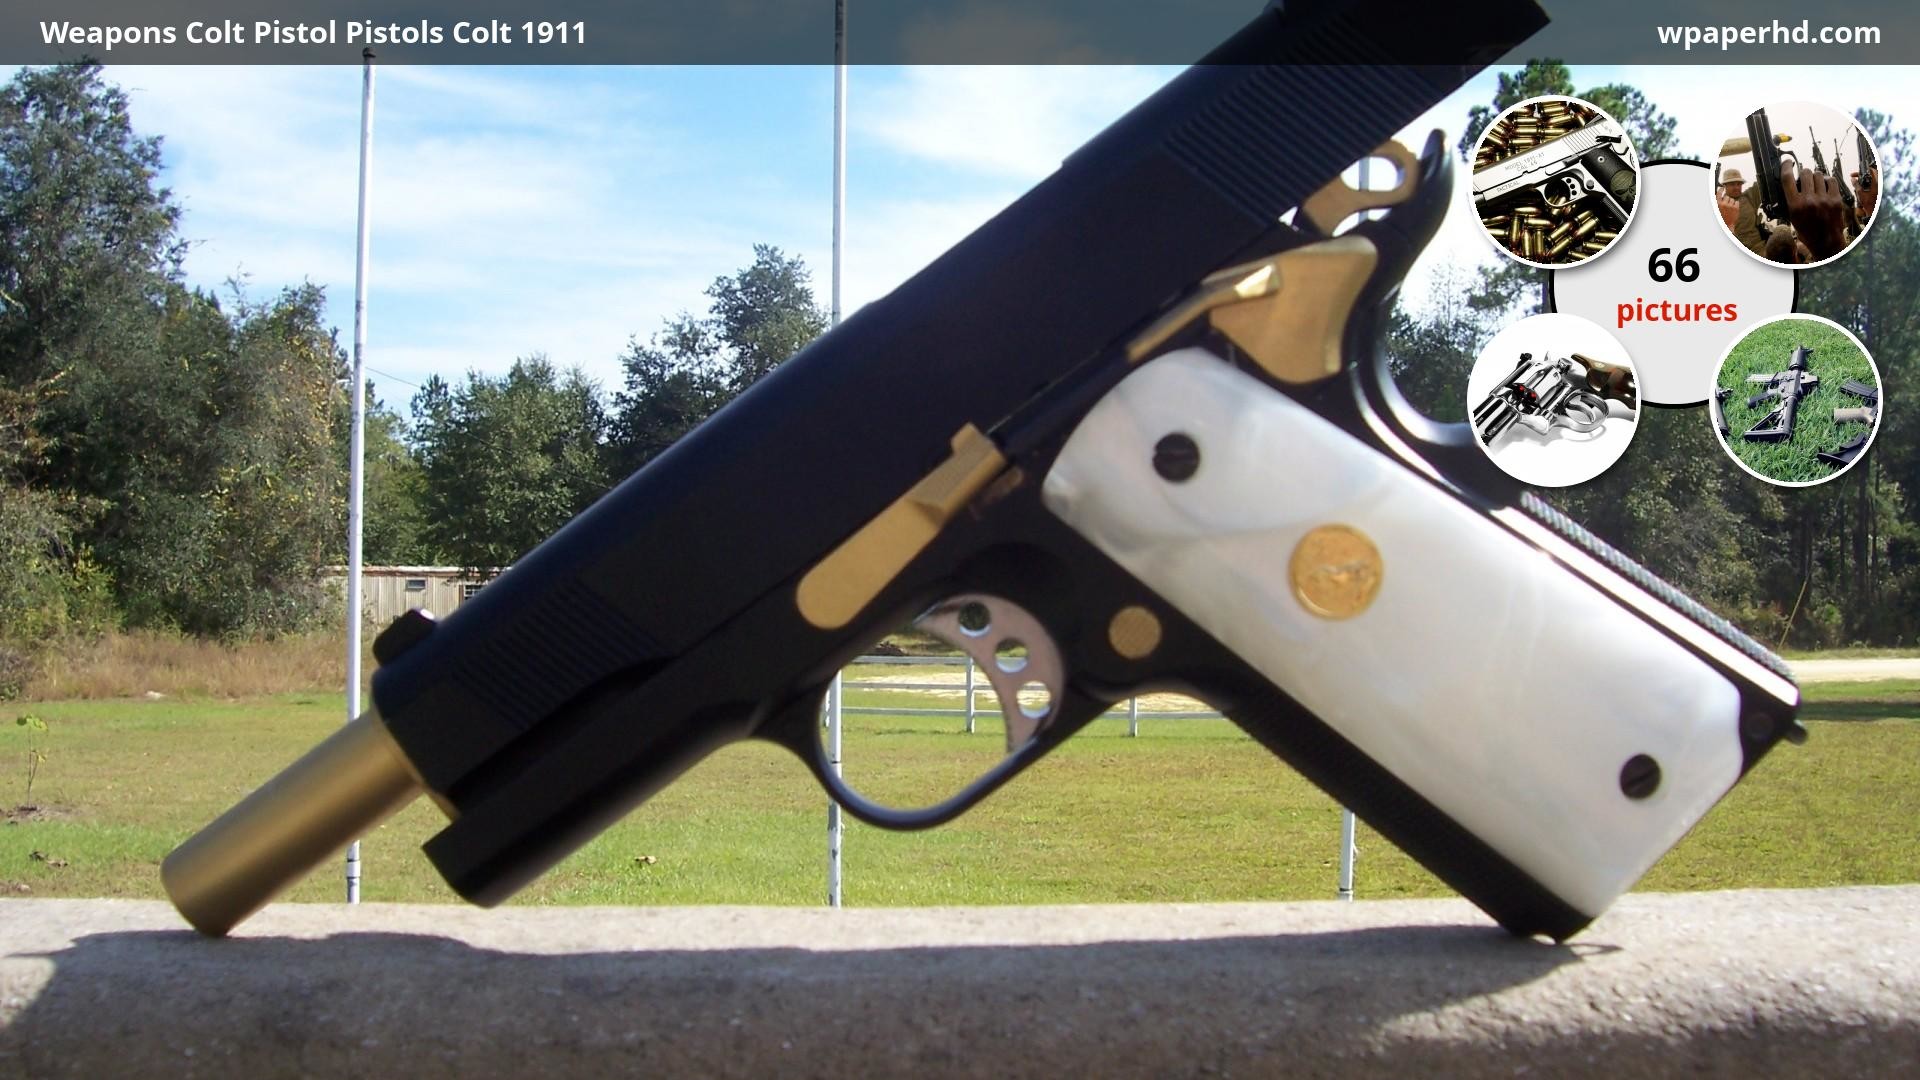 1920x1080 ... Colt 1911 wallpaper, where you can download this picture in Original  size and ...